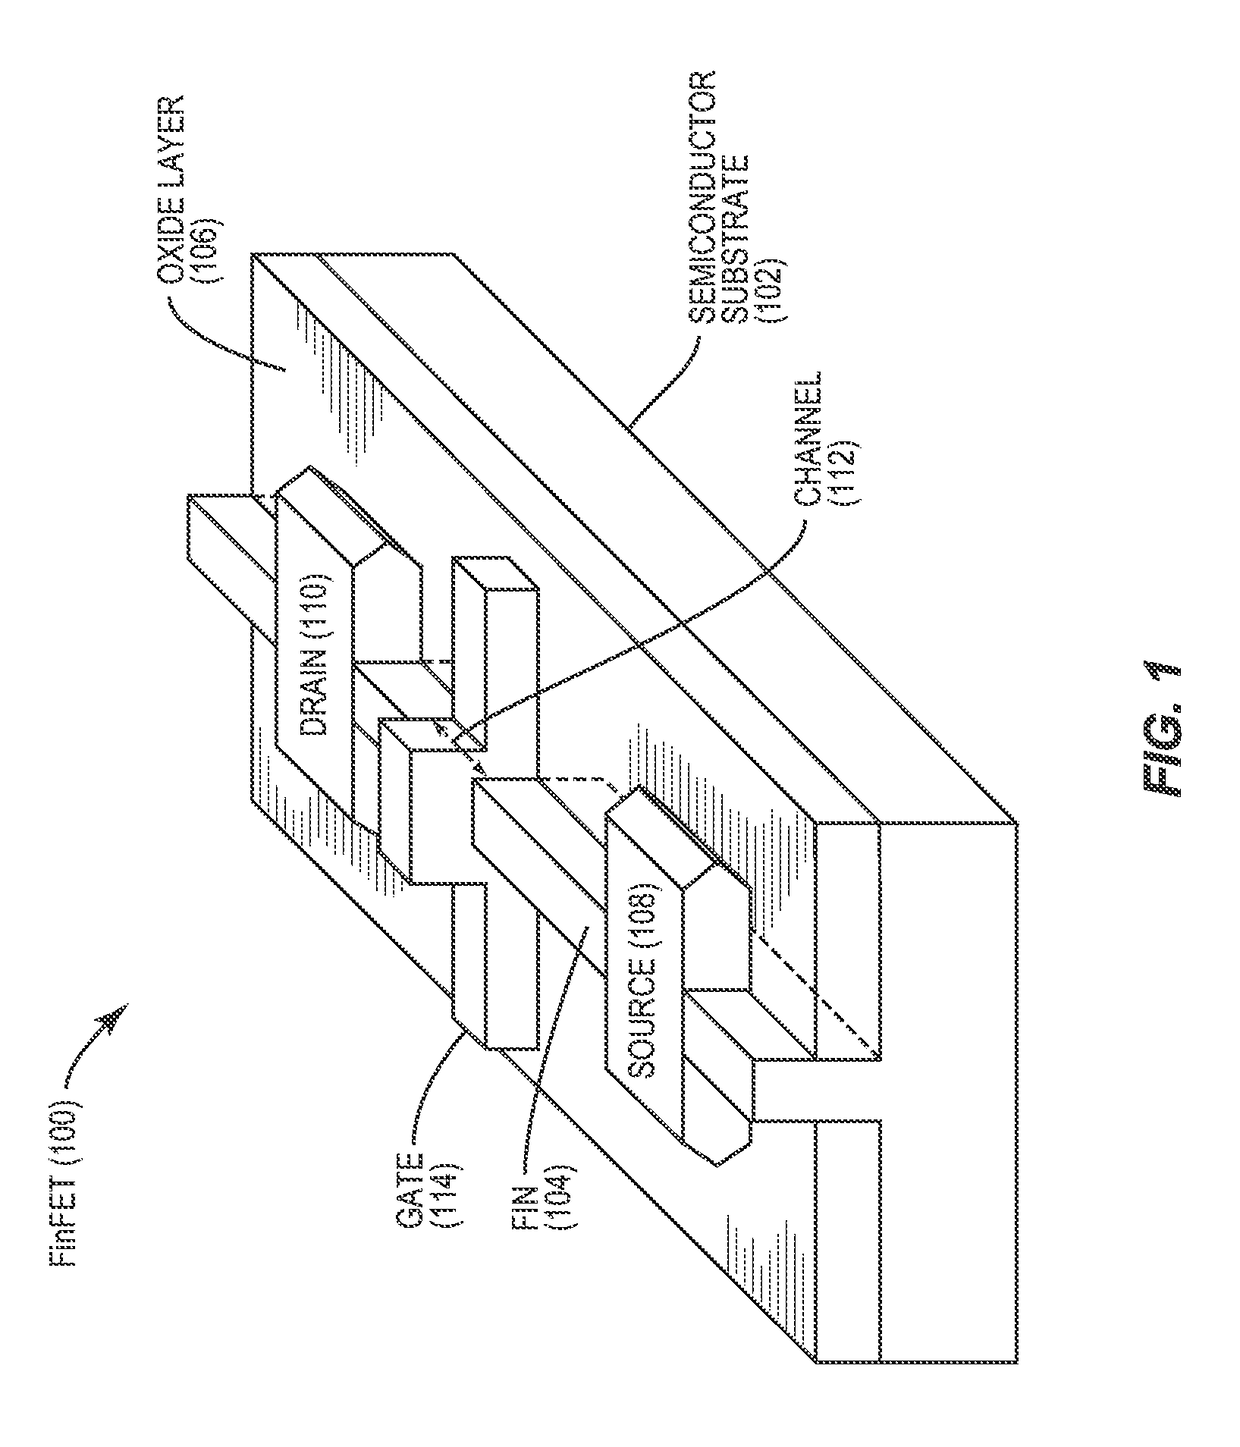 Fin field effect transistor (FET) (finfet) complementary metal oxide semiconductor (CMOS) circuits employing single and double diffusion breaks for increased performance